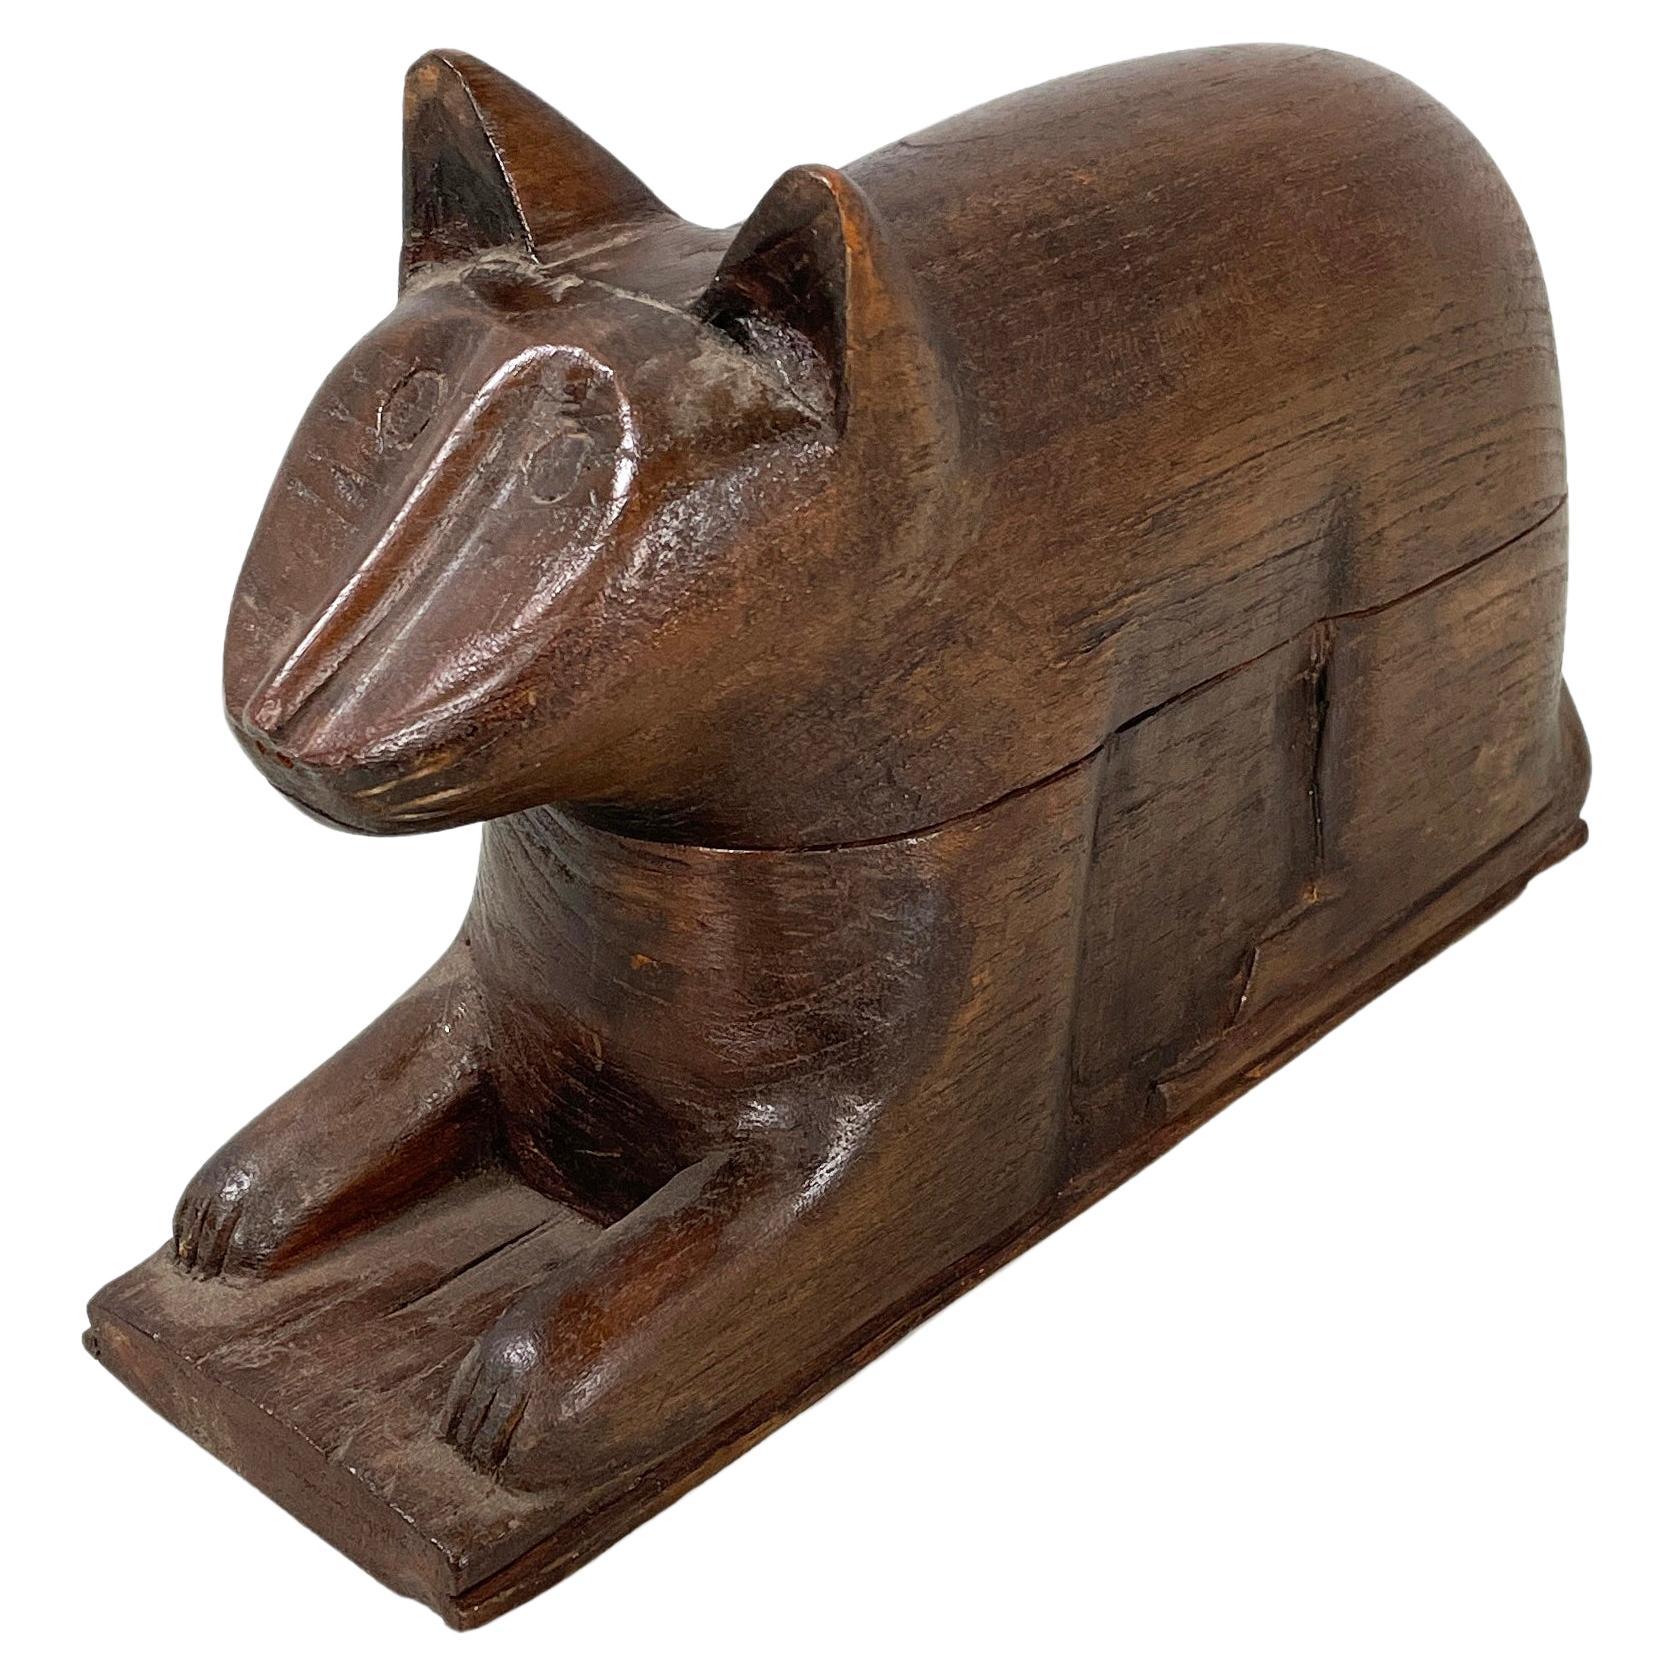 Chinese antique Wooden cat jewelry box or object holder, 1920s